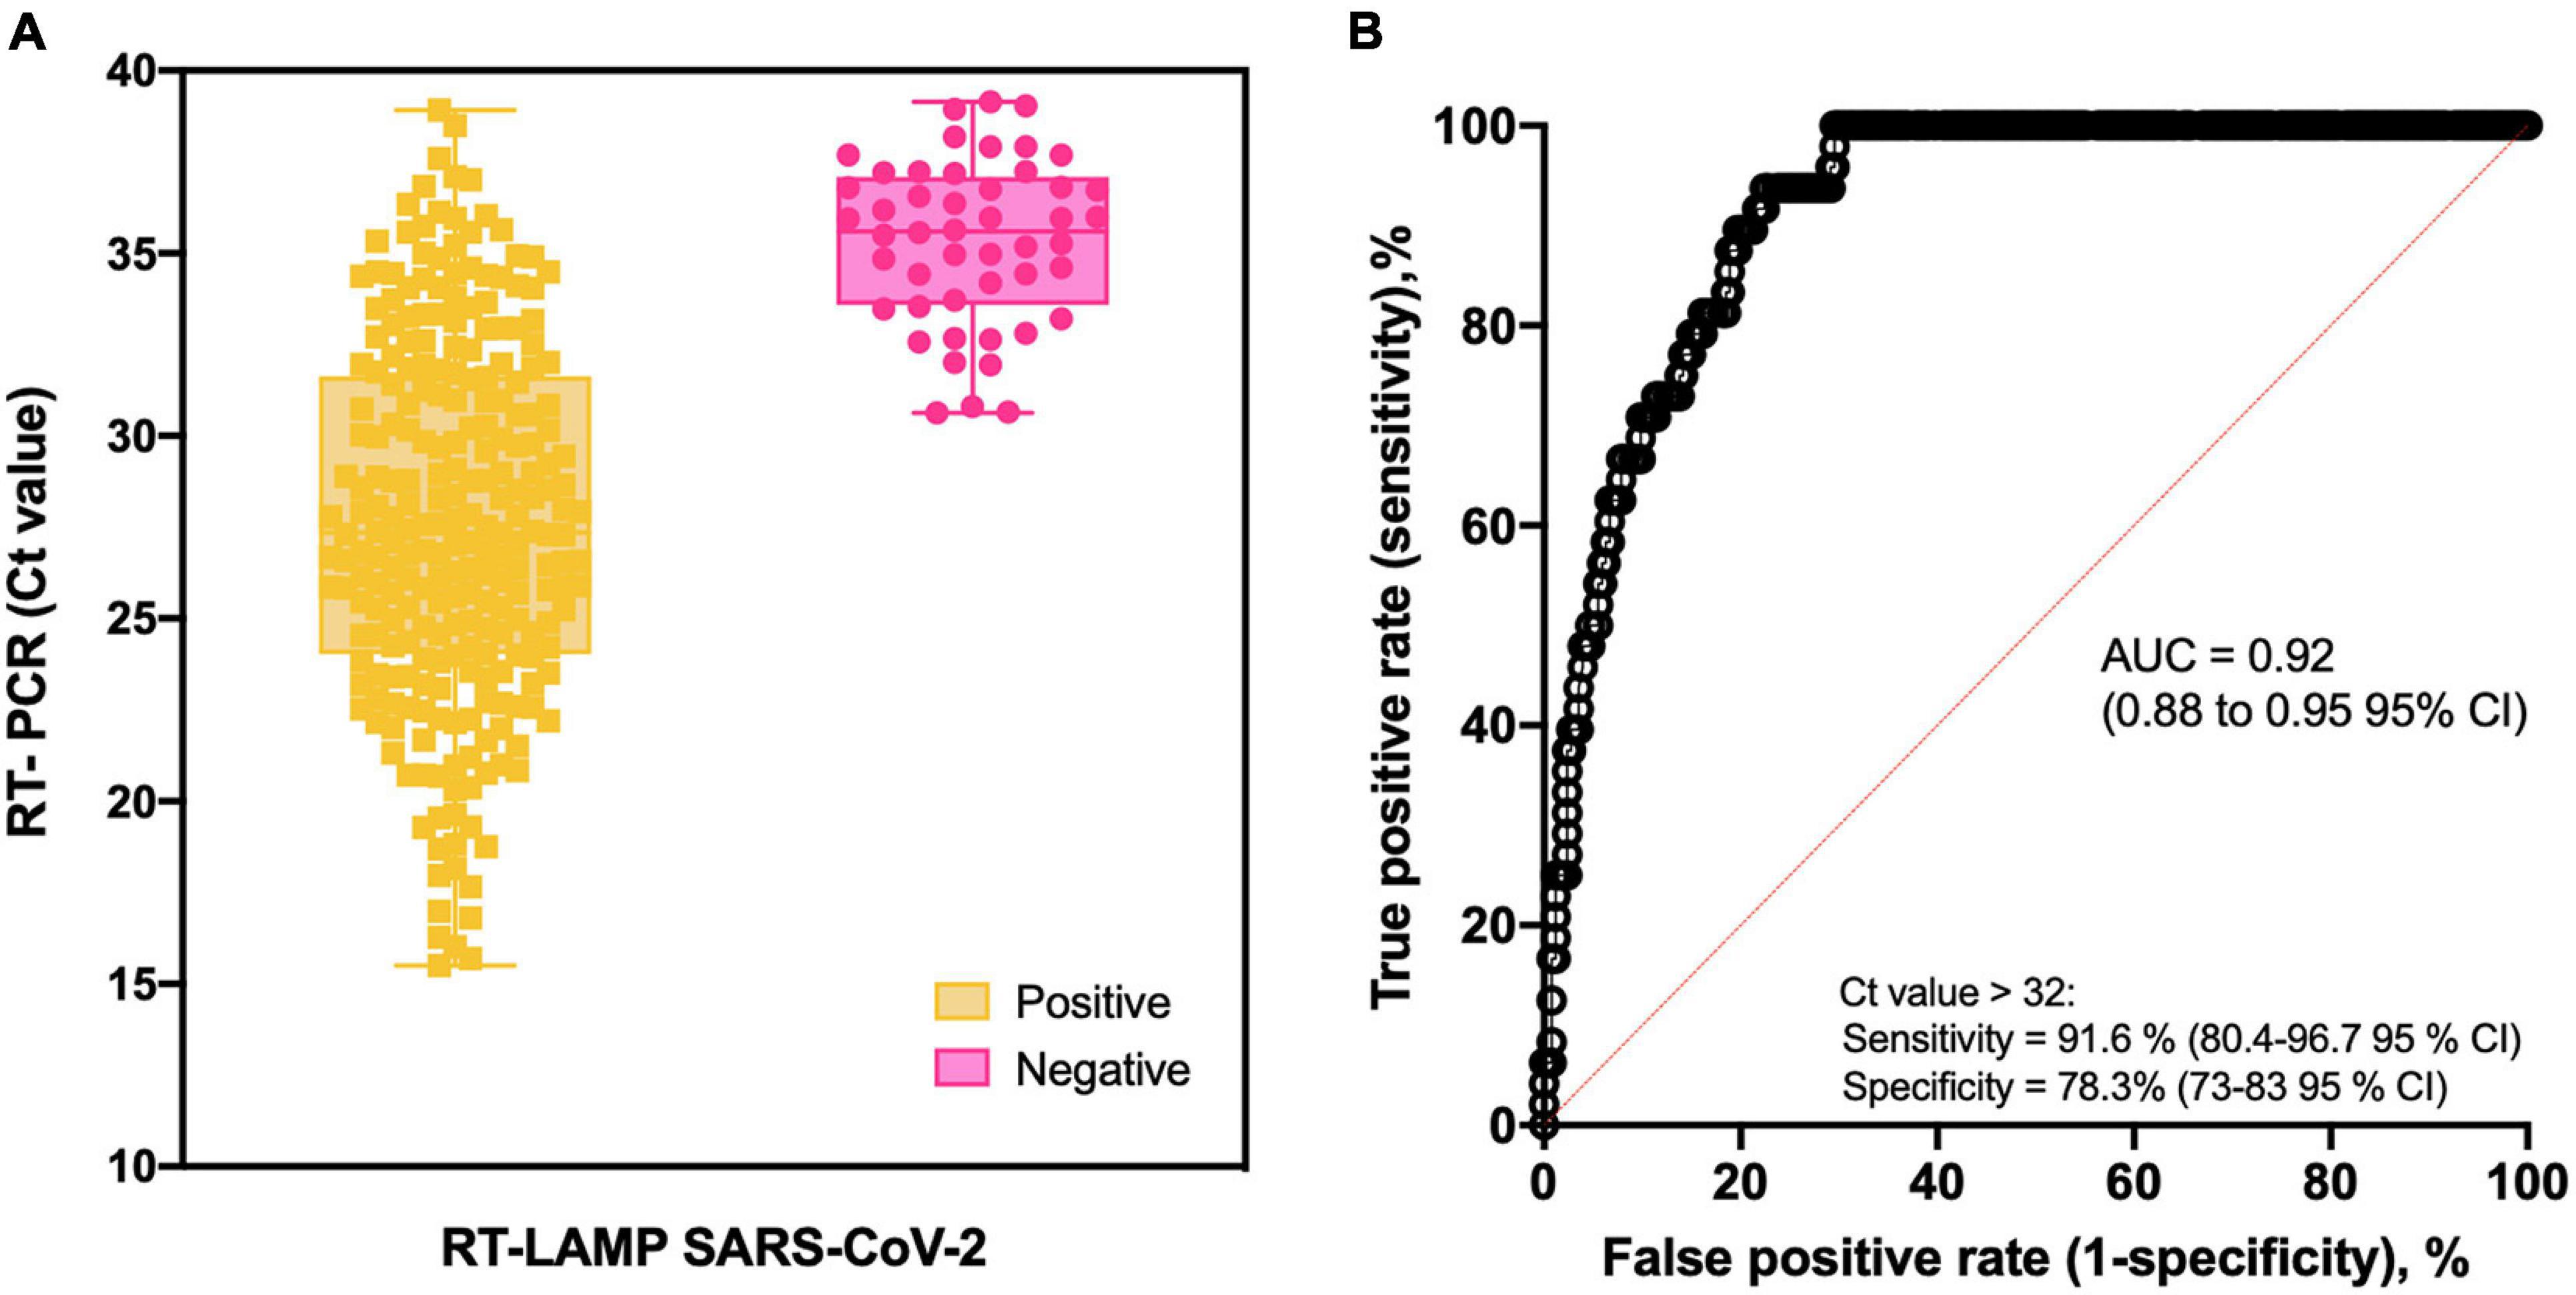 Frontiers Optimization And Clinical Validation Of Colorimetric Reverse Transcription Loop Mediated Isothermal Amplification A Fast Highly Sensitive And Specific Covid 19 Molecular Diagnostic Tool That Is Robust To Detect Sars Cov 2 Variants Of